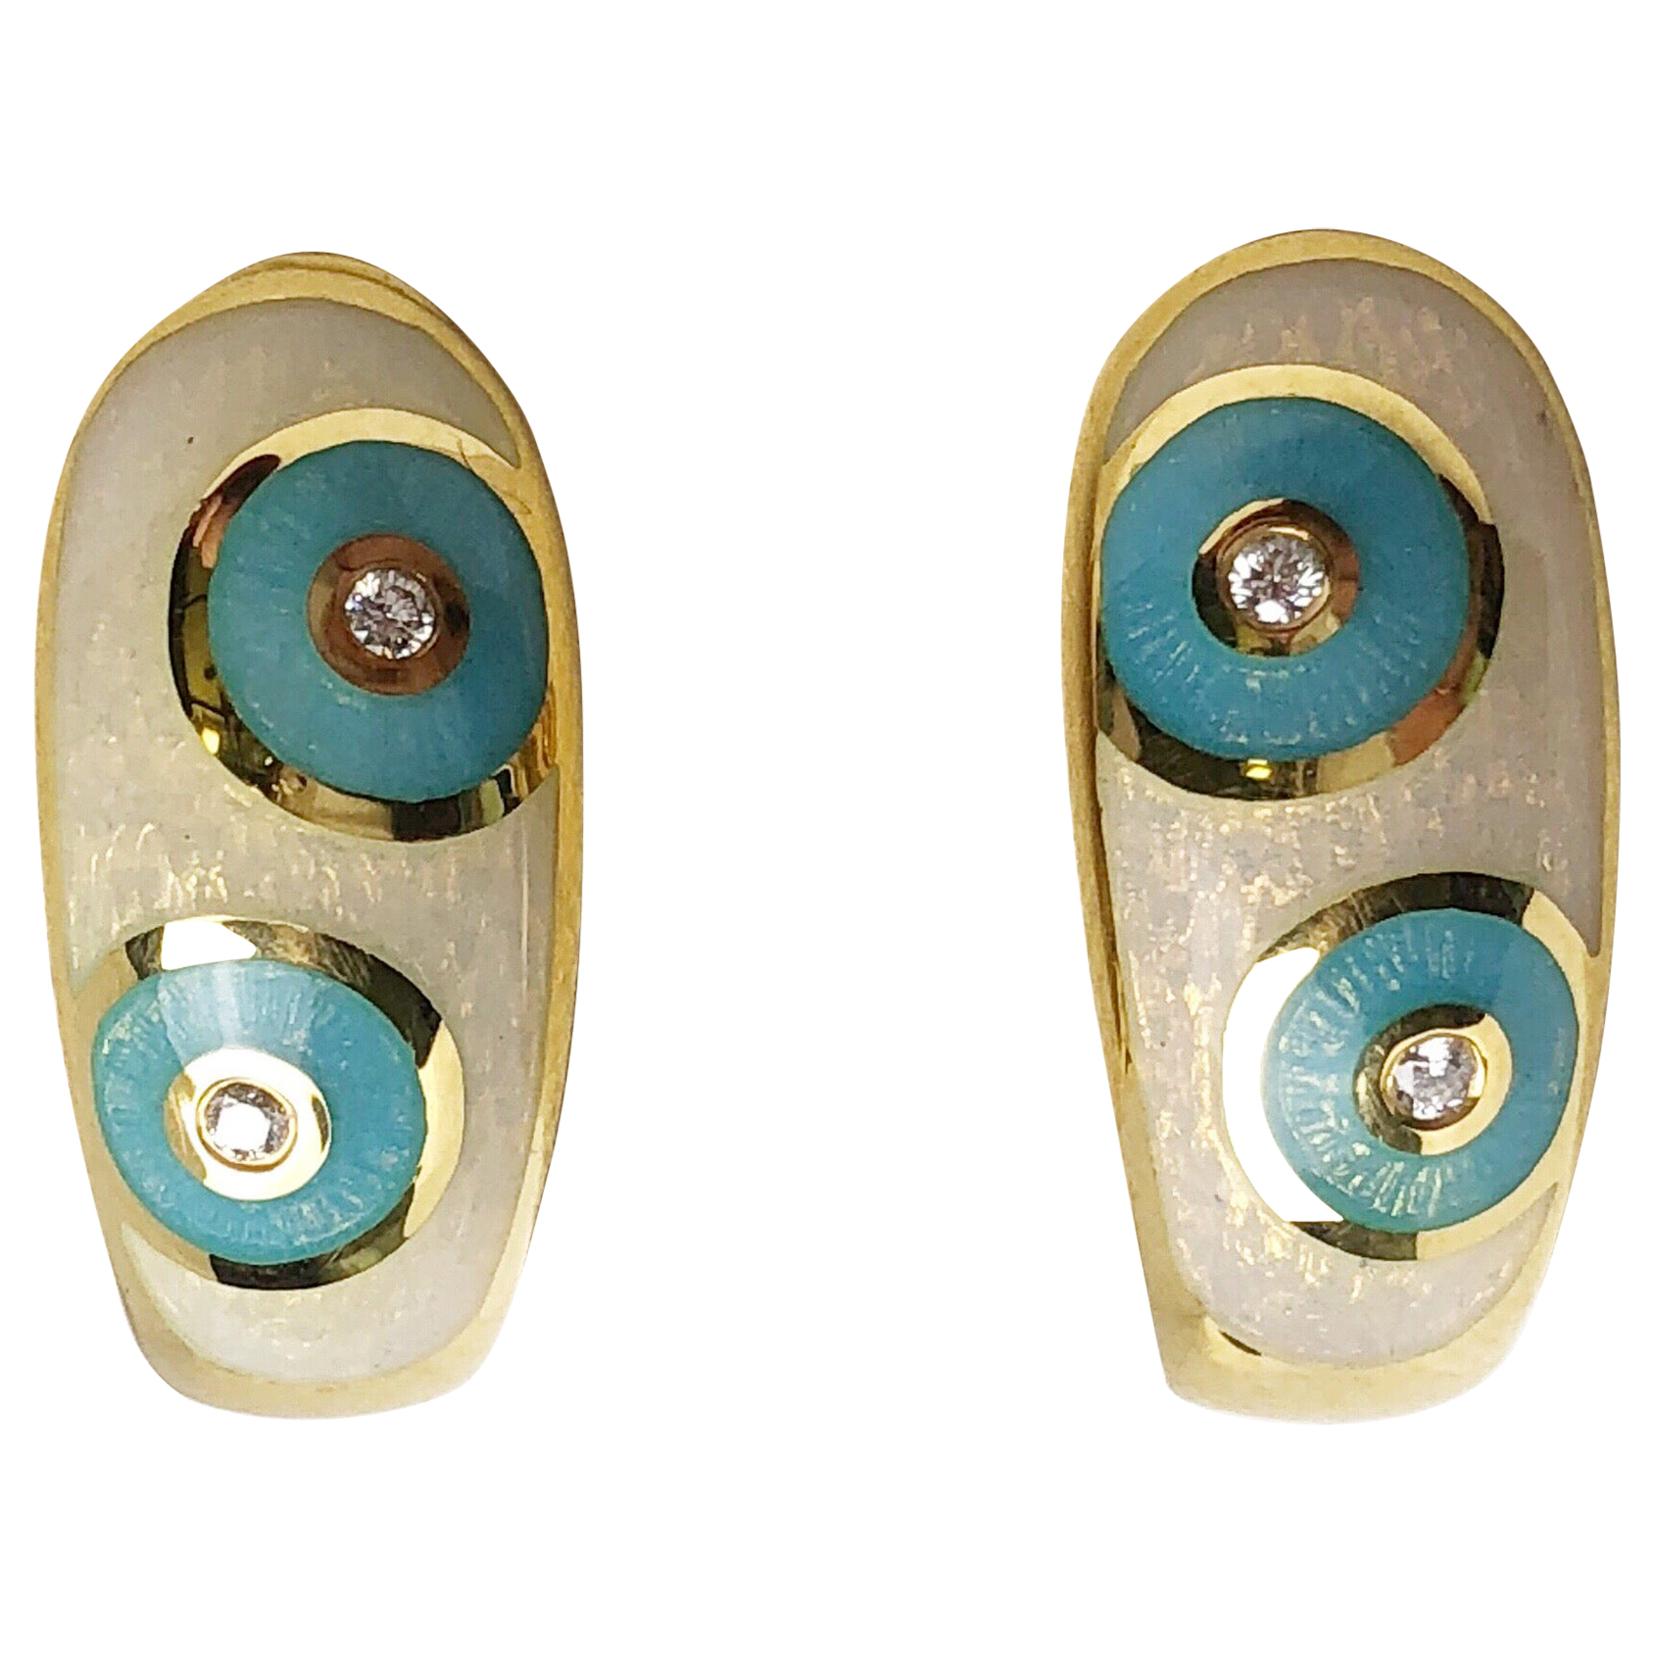 Faberge 18 Karat Gold, White and Turquoise Enamel Earrings with Certificate